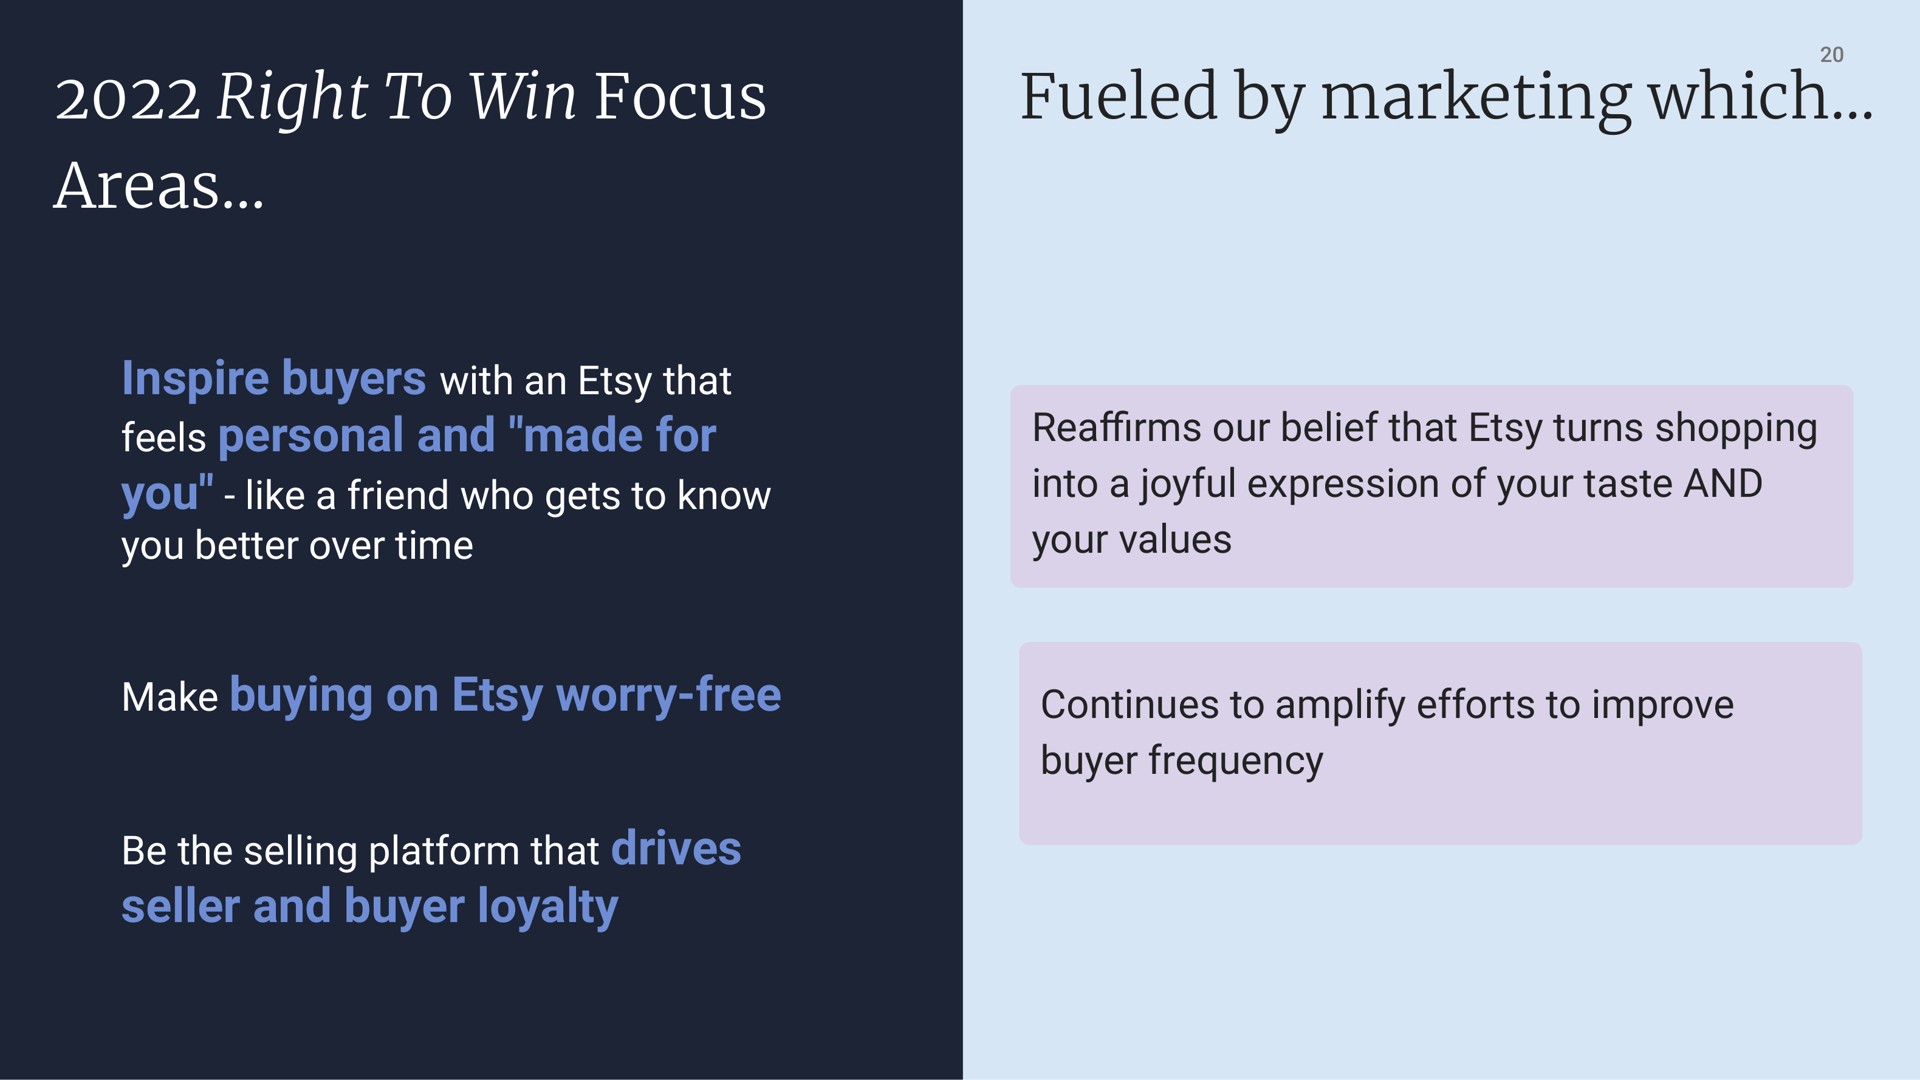 right to win focus fairs see fueled by marketing which | Etsy